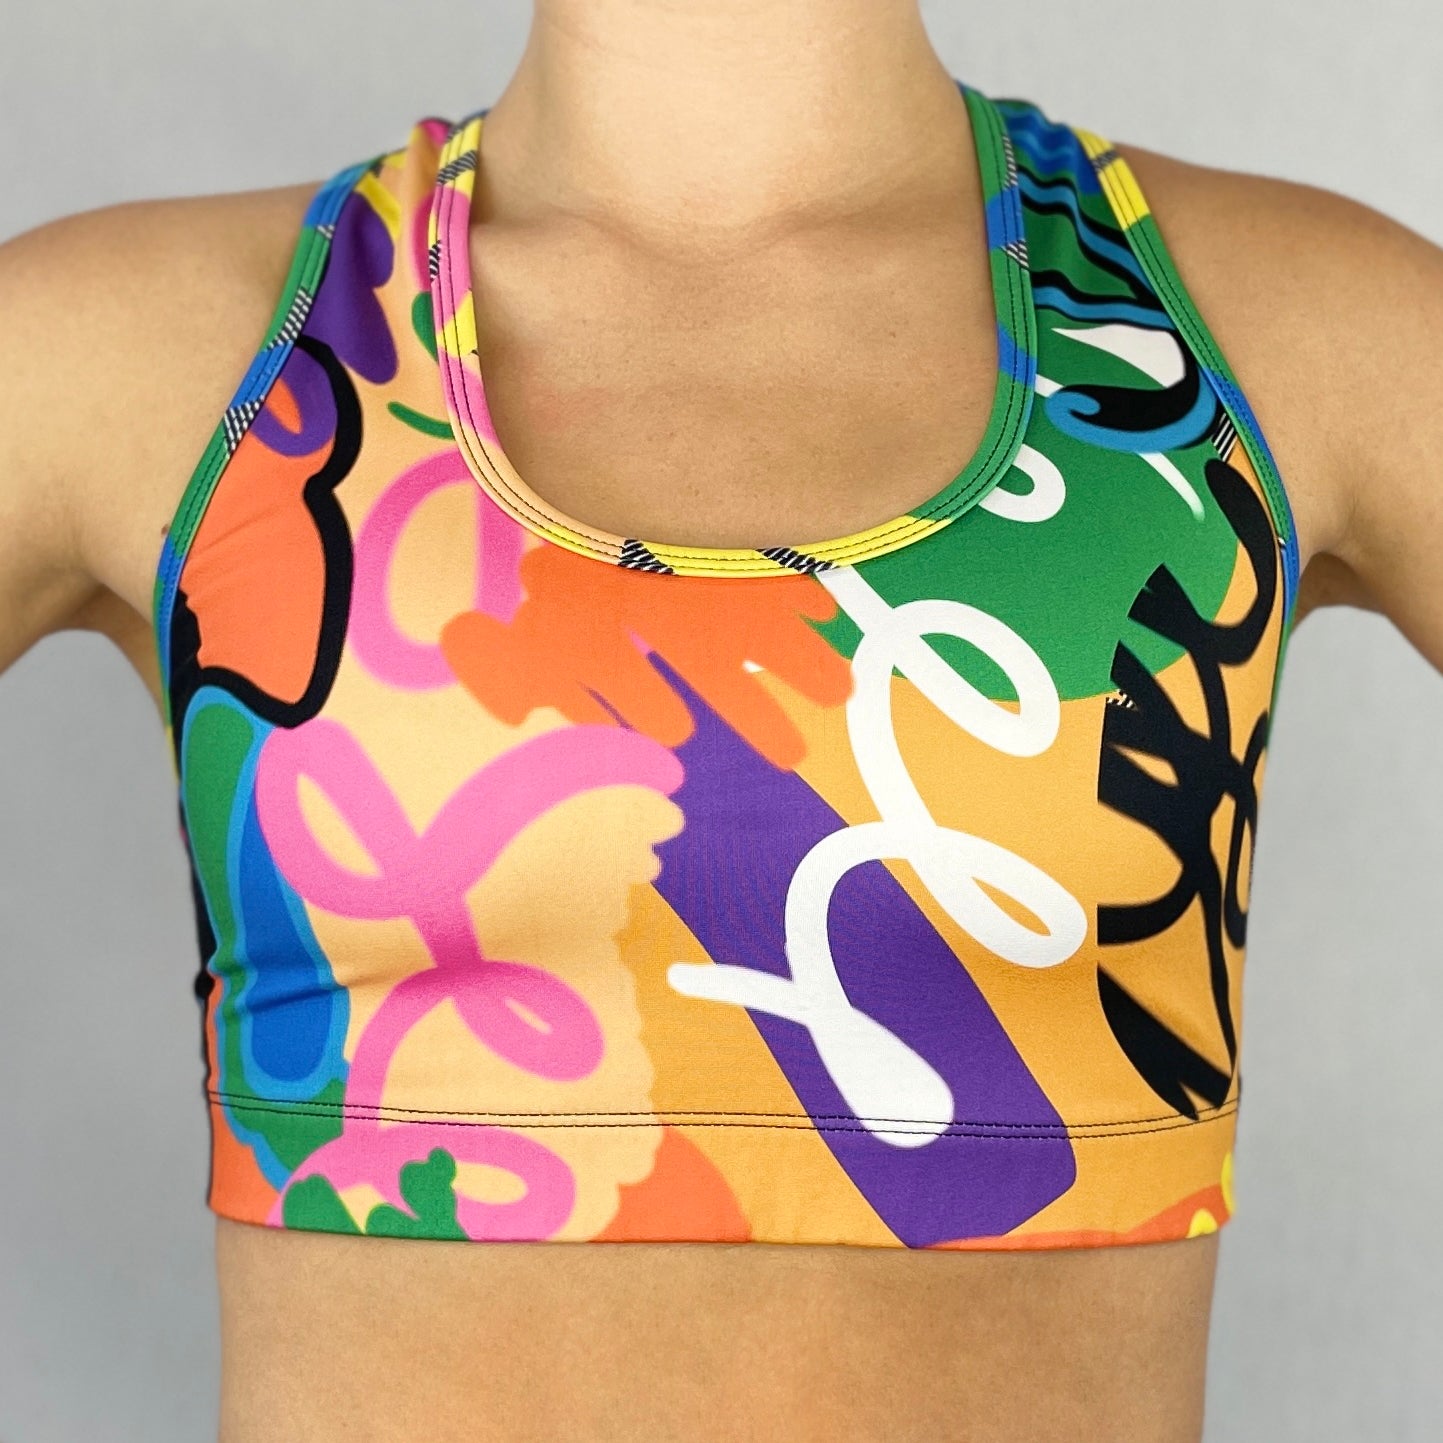 colourful sports bra made sustainably from recycled materials - Venus - front